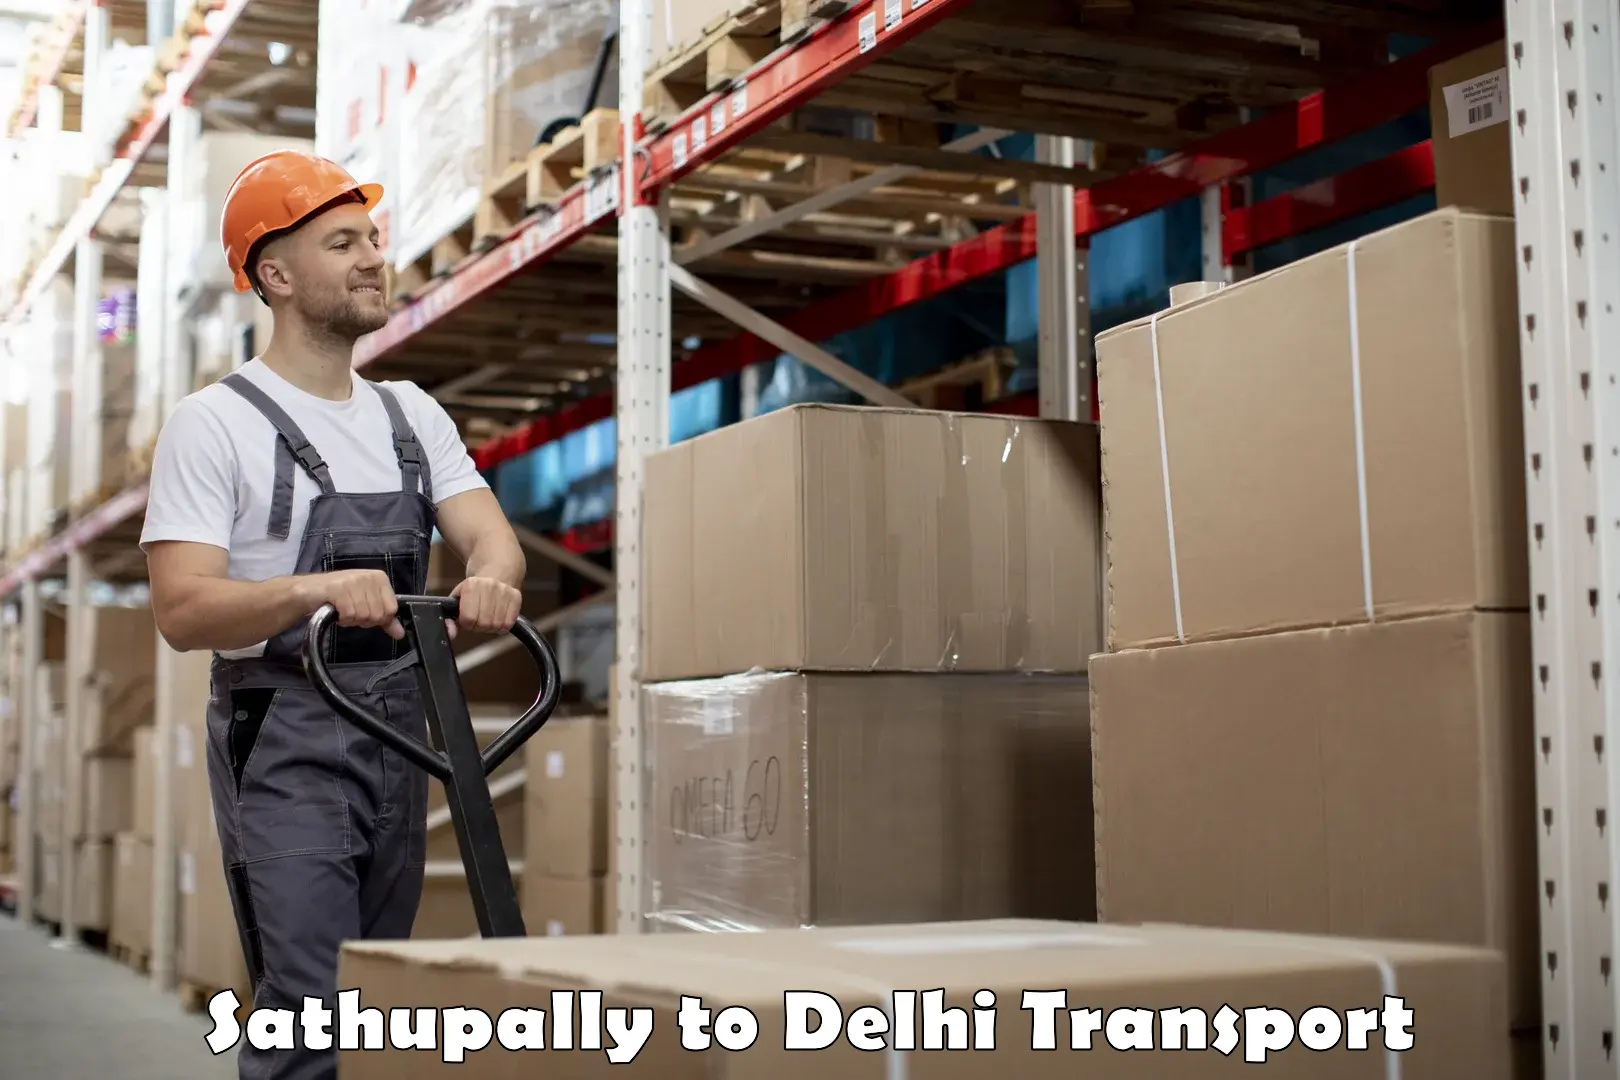 Truck transport companies in India Sathupally to University of Delhi